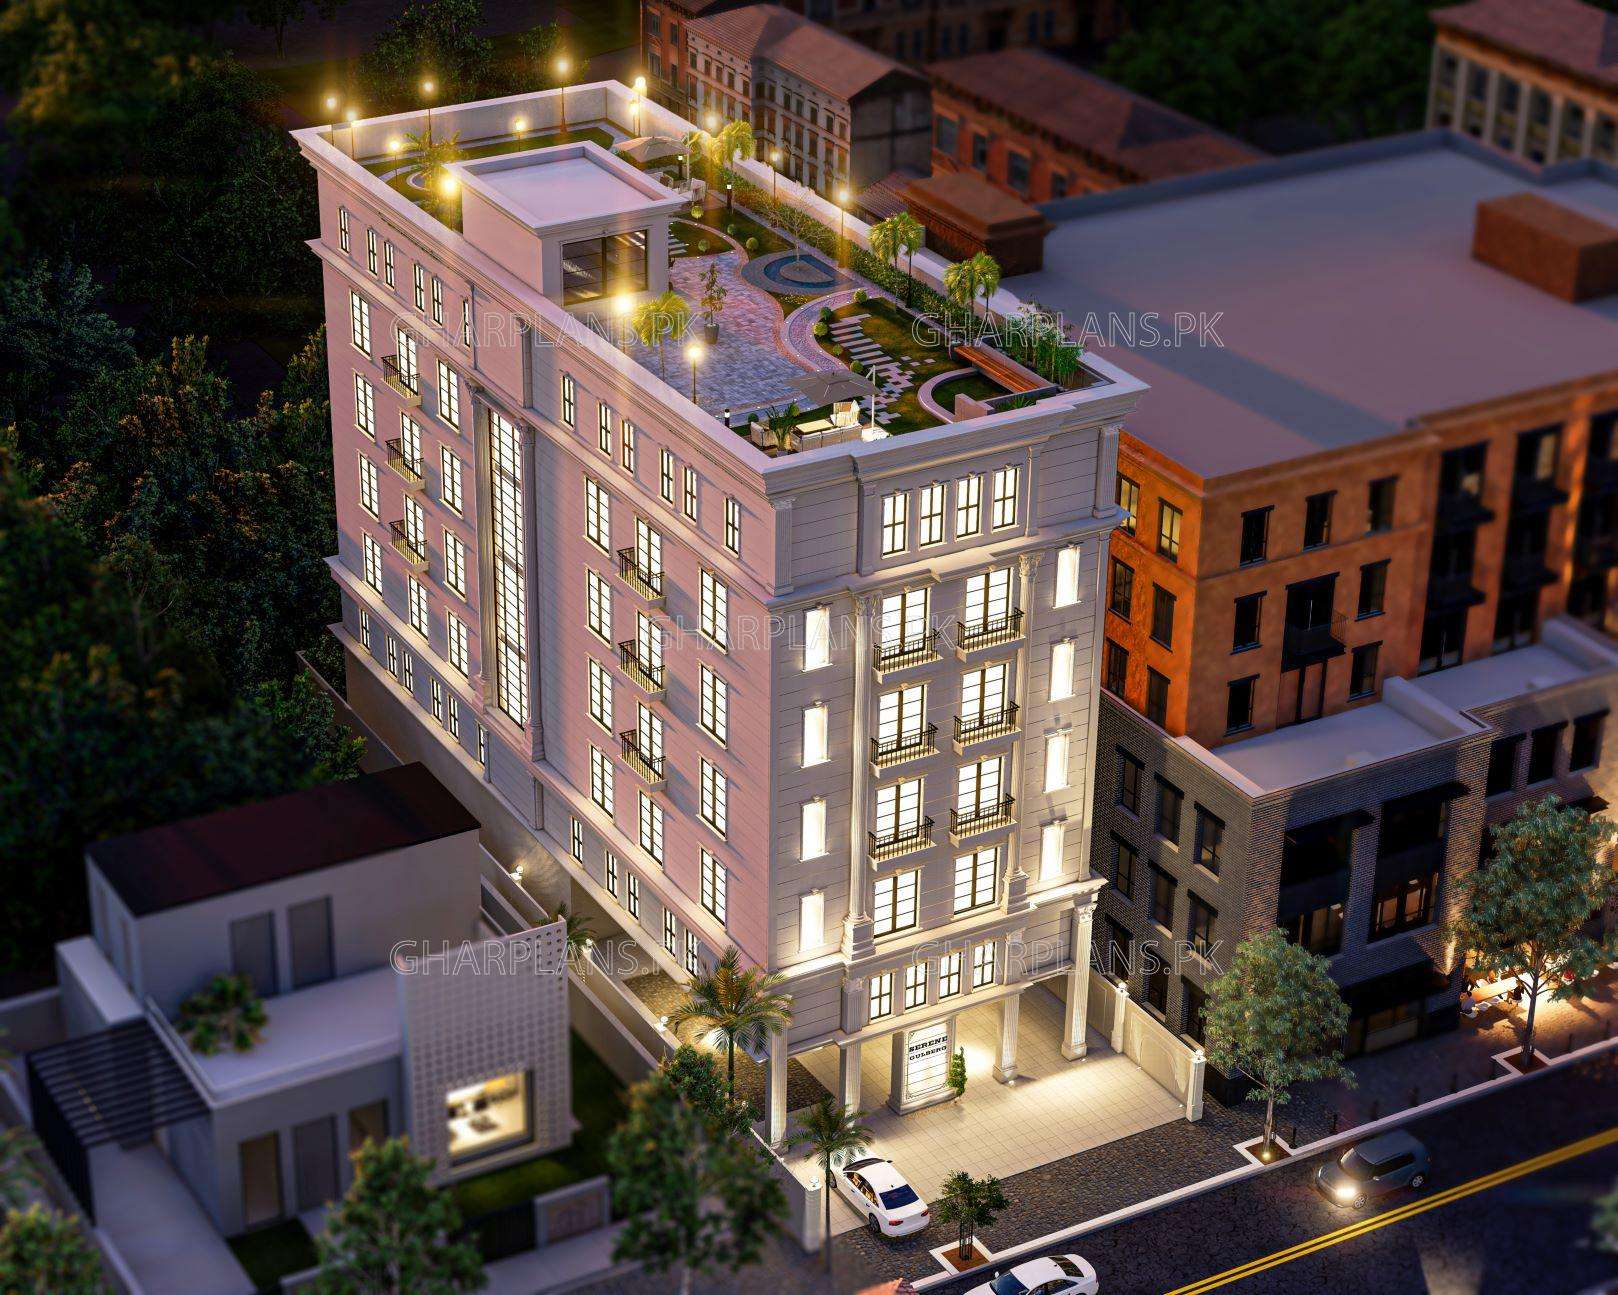 Design & Elevation of 2 kanal apartment building in Gulberg, Lahore